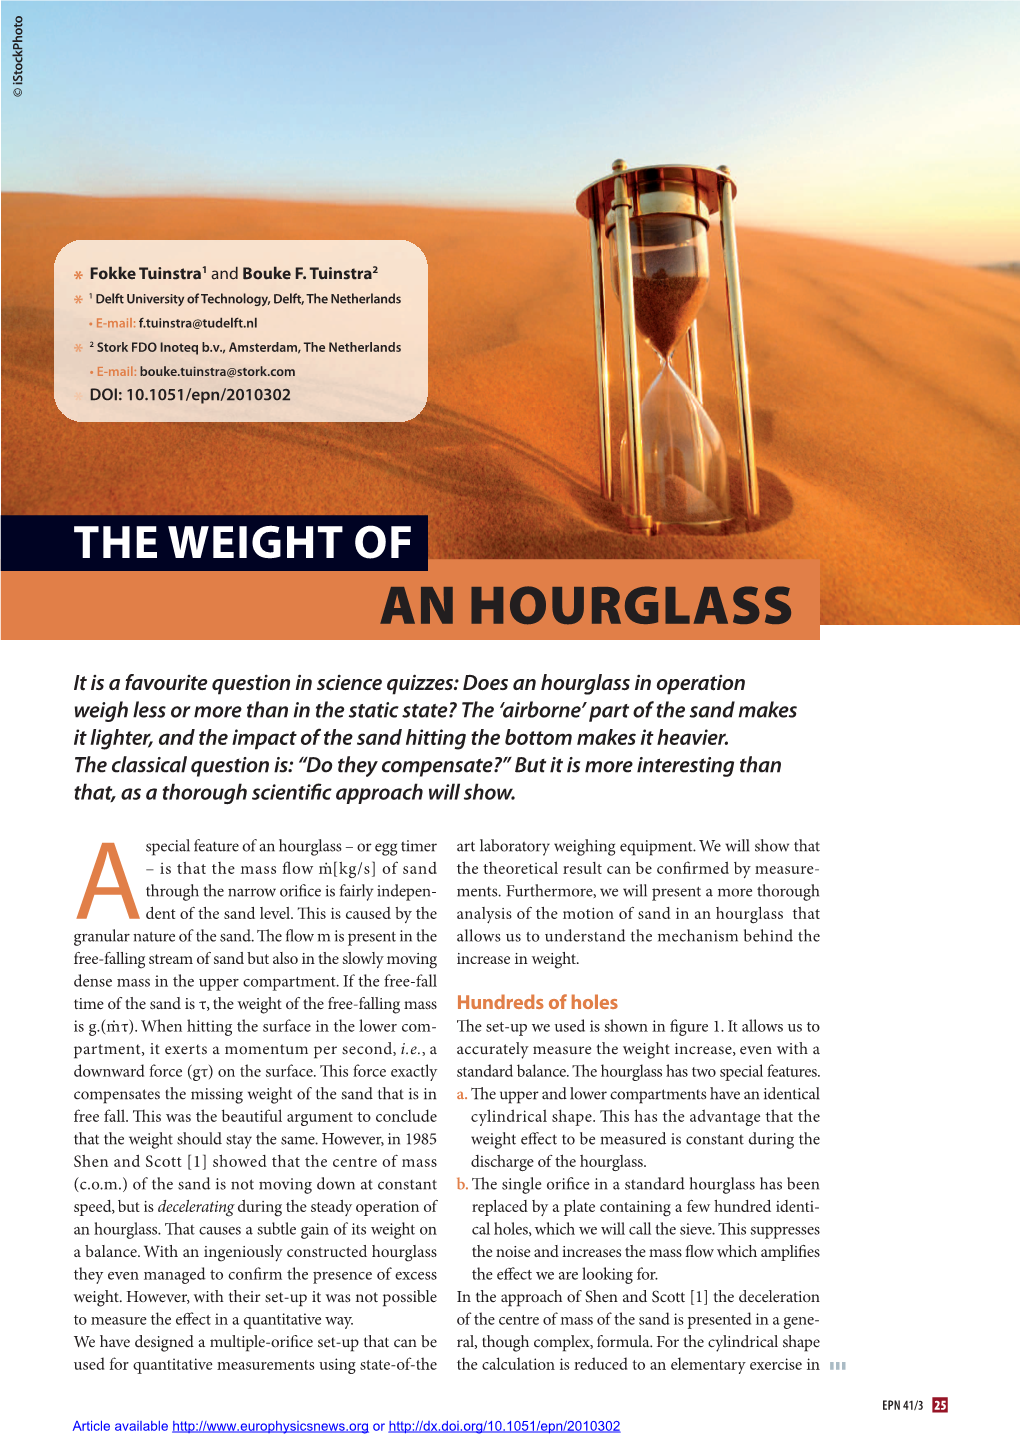 THE Weight of an Hourglass